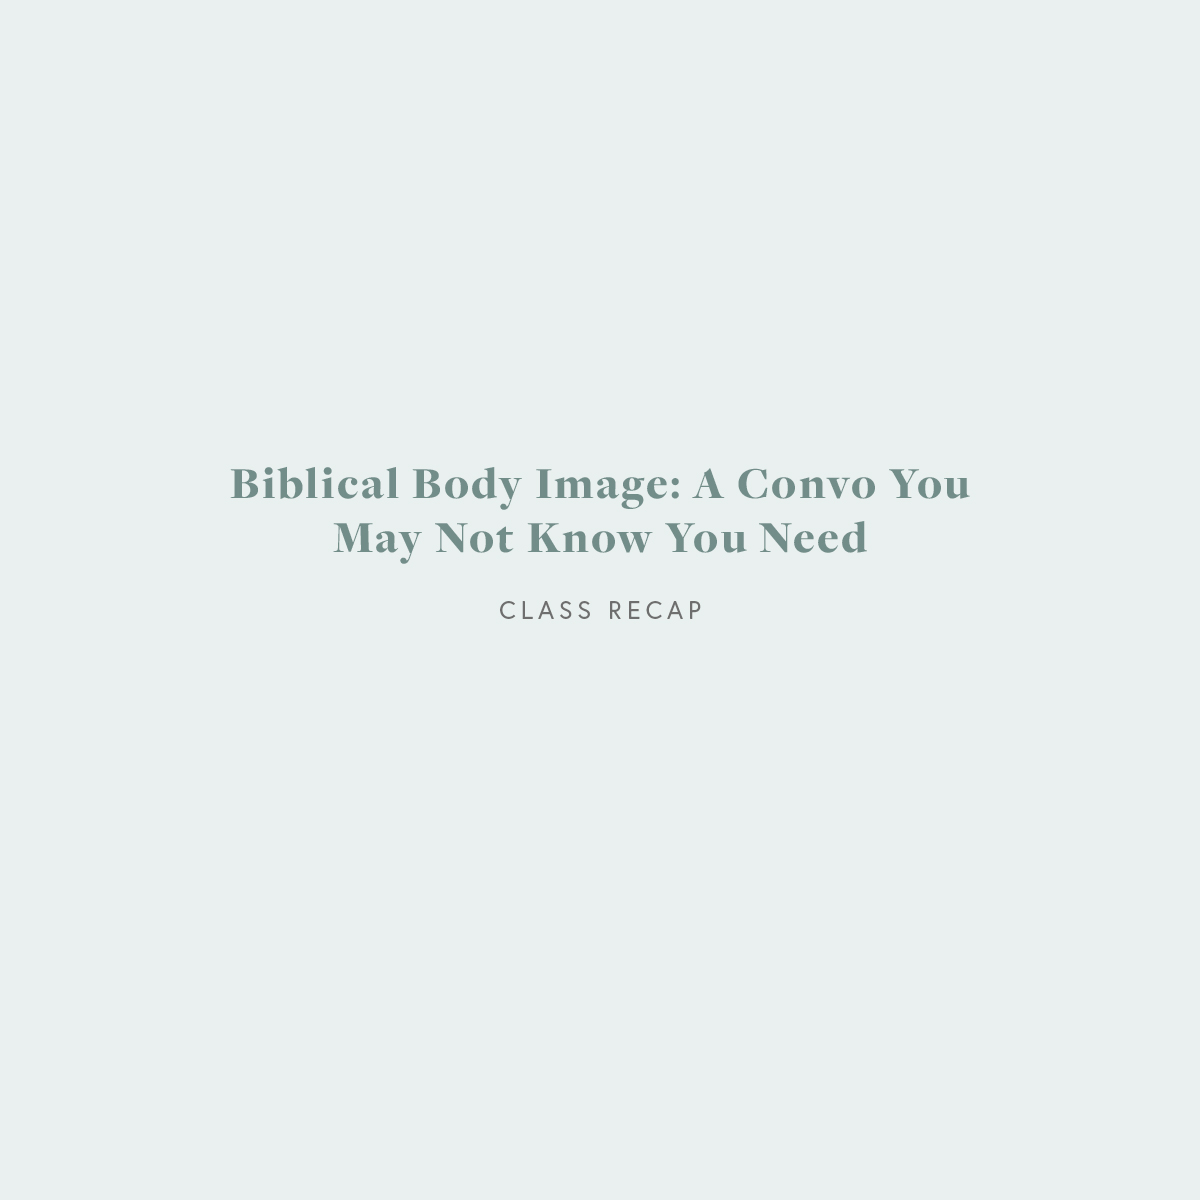 Biblical Body Image: A Convo You May Not Know You Need